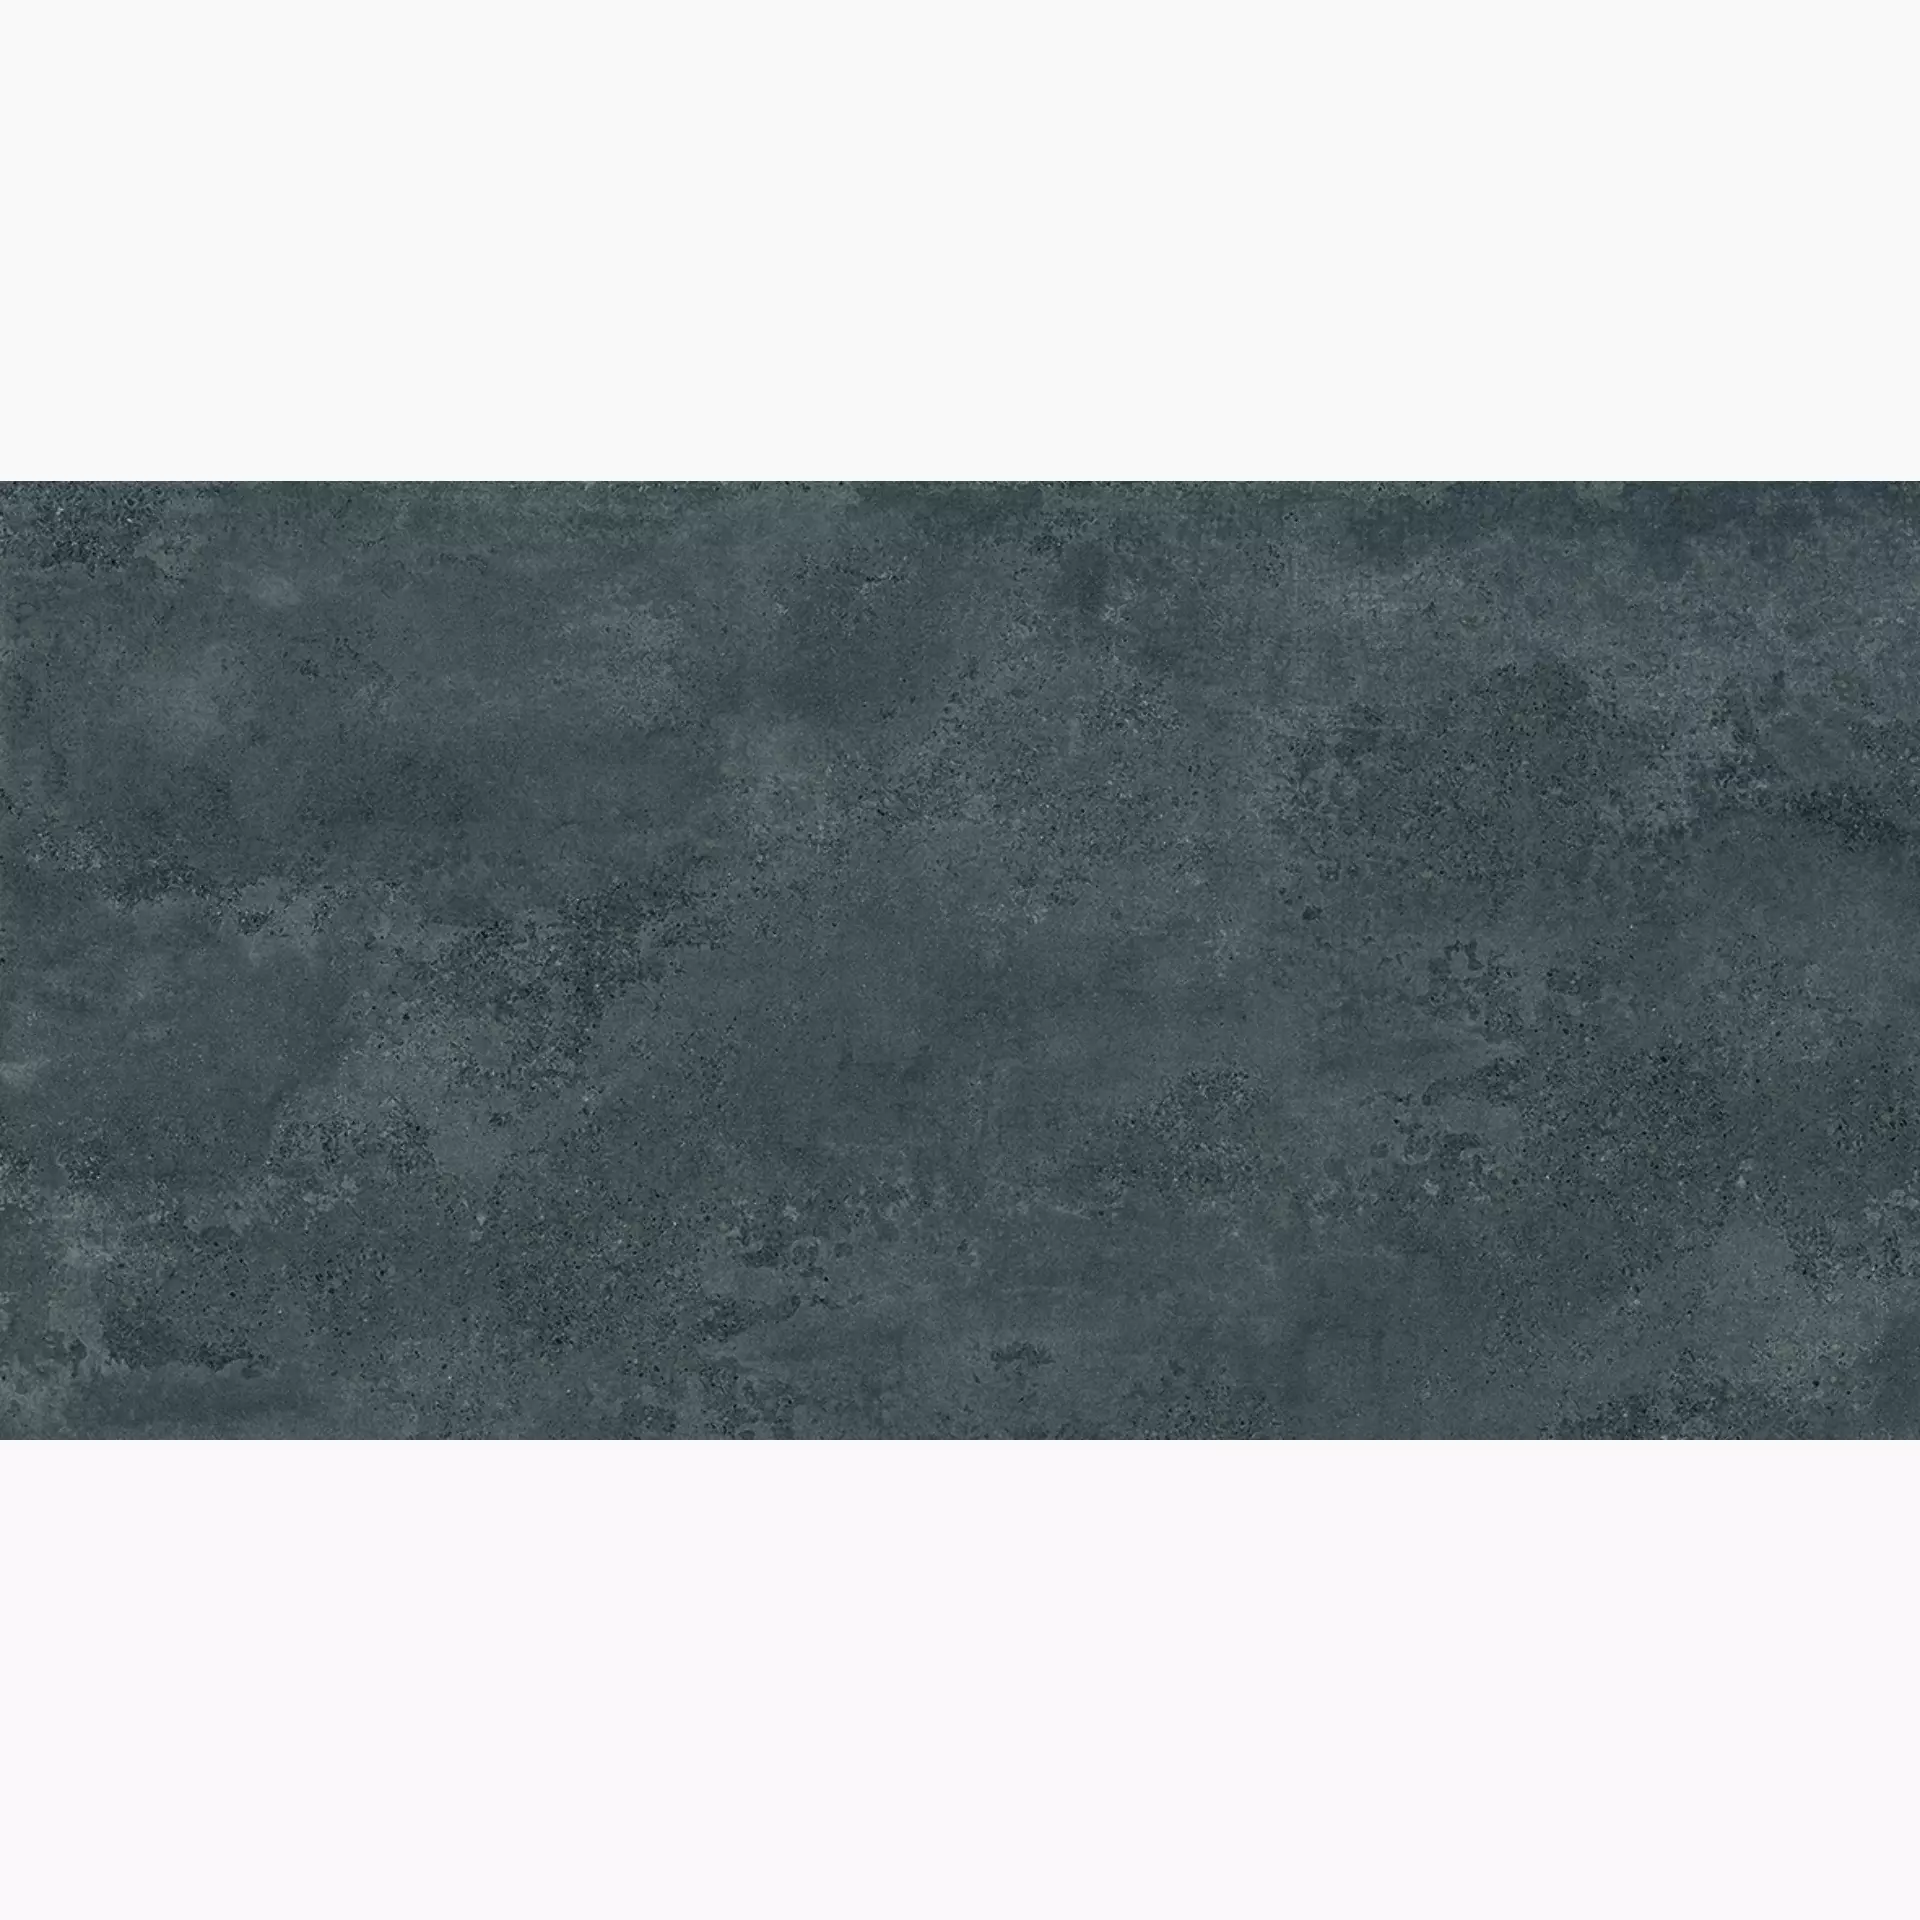 Provenza Re-Play Concrete Anthracite Naturale Recupero EKFY 80x160cm rectified 9,5mm